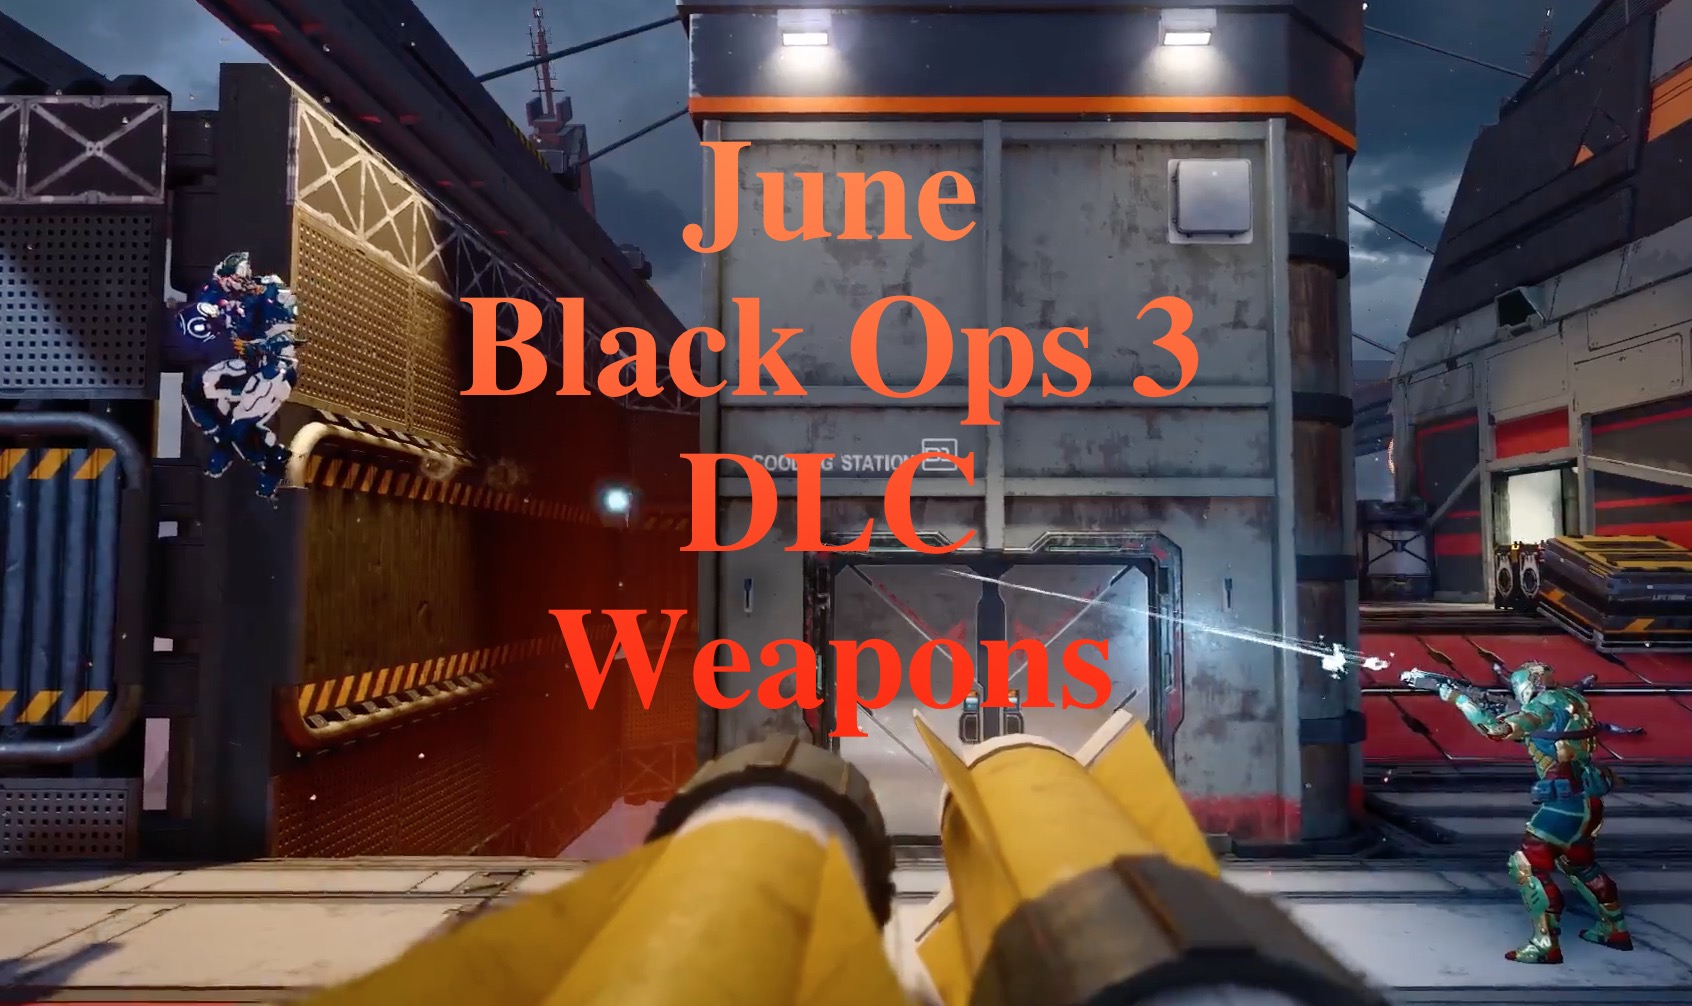 What you need to know about the new Black Ops 3 DLC weapons in June.